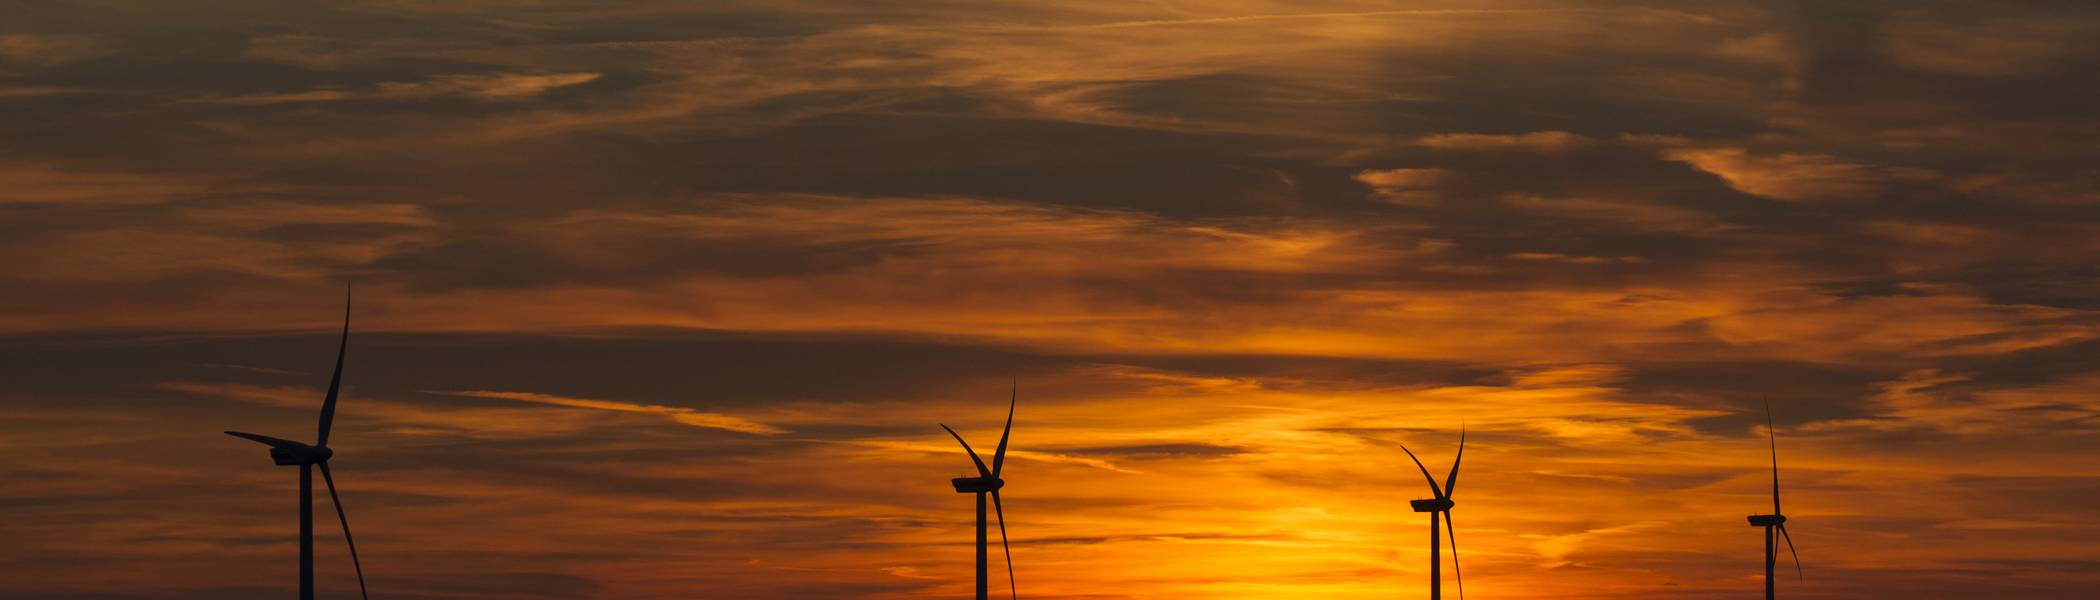 Offshore Wind Farm in Sunset